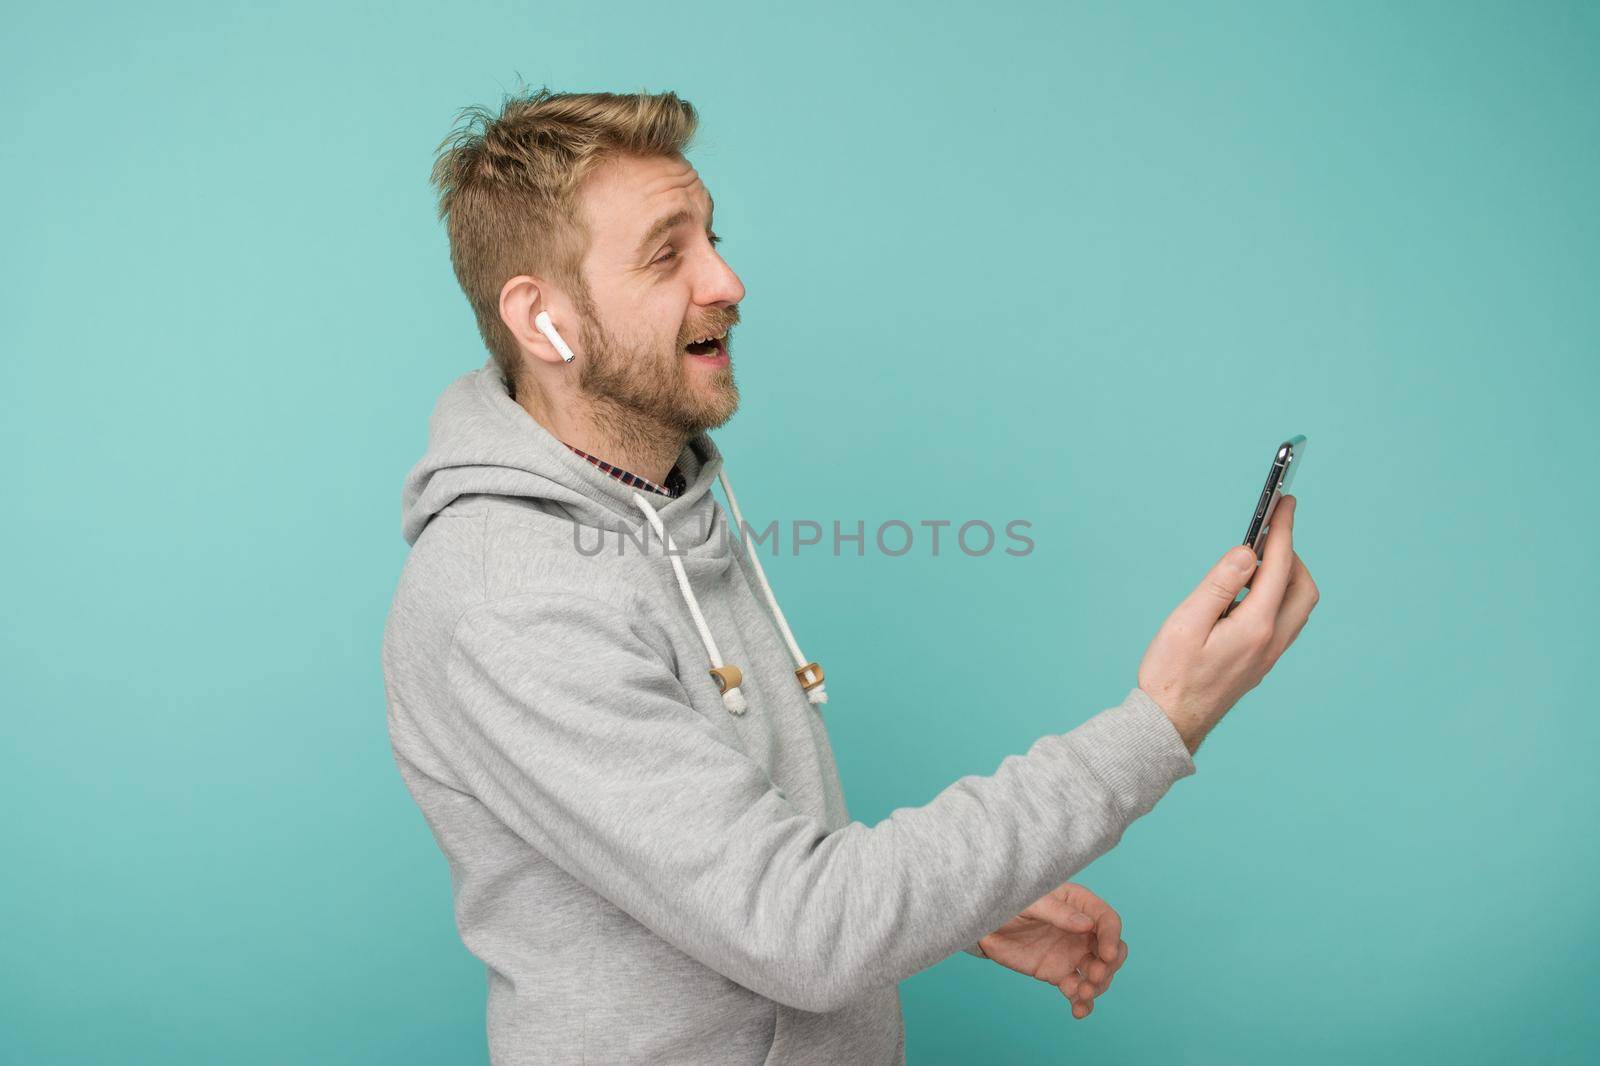 Tula, Russia - May 1, 2019: Happy Man listening music Apple AirPods wireless - Image